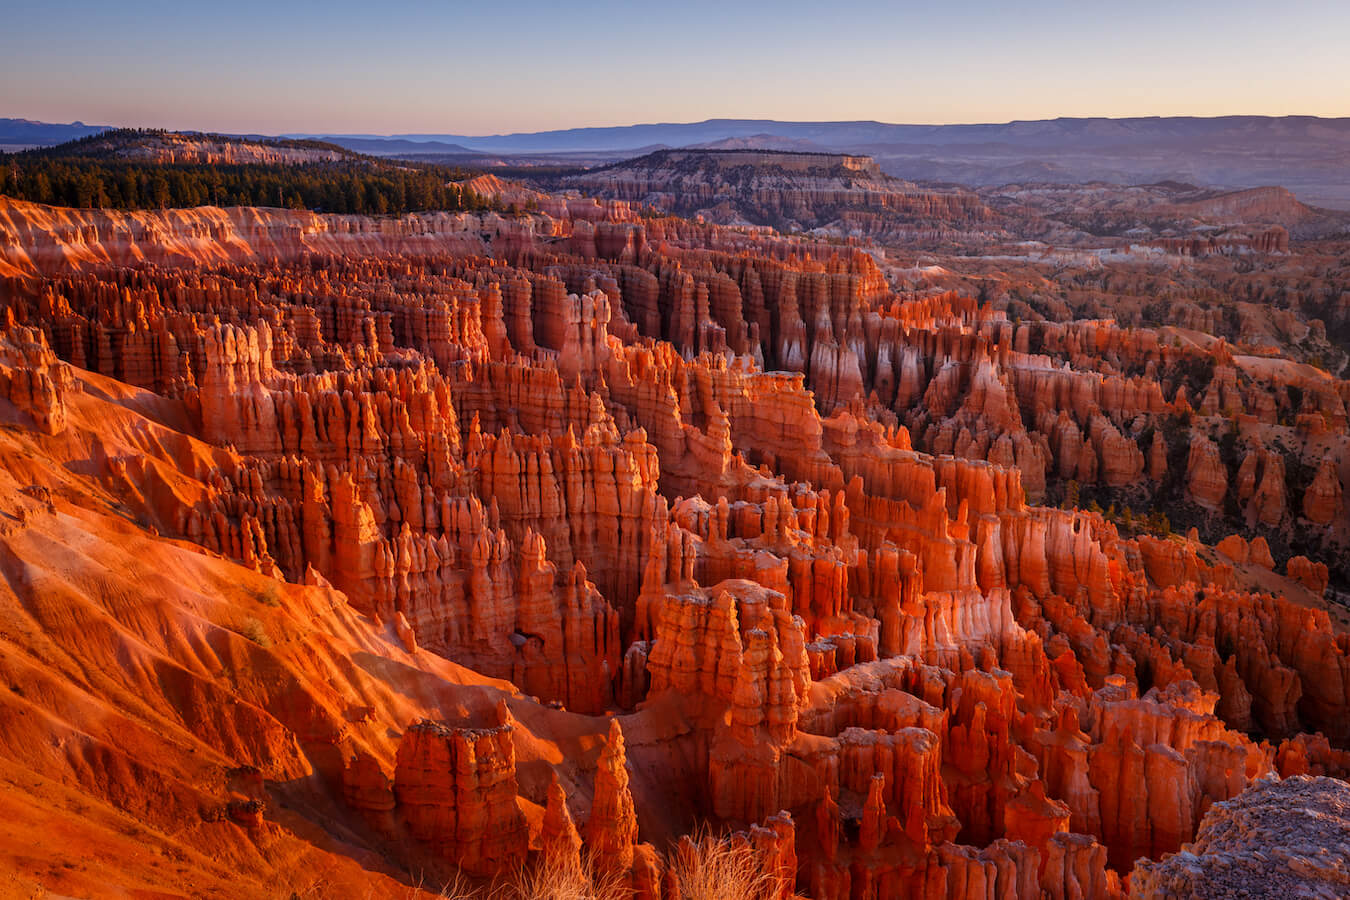 Inspiration Point, Bryce Canyon National Park, Utah | Photo Credit: Shutterstock / Atmosphere1